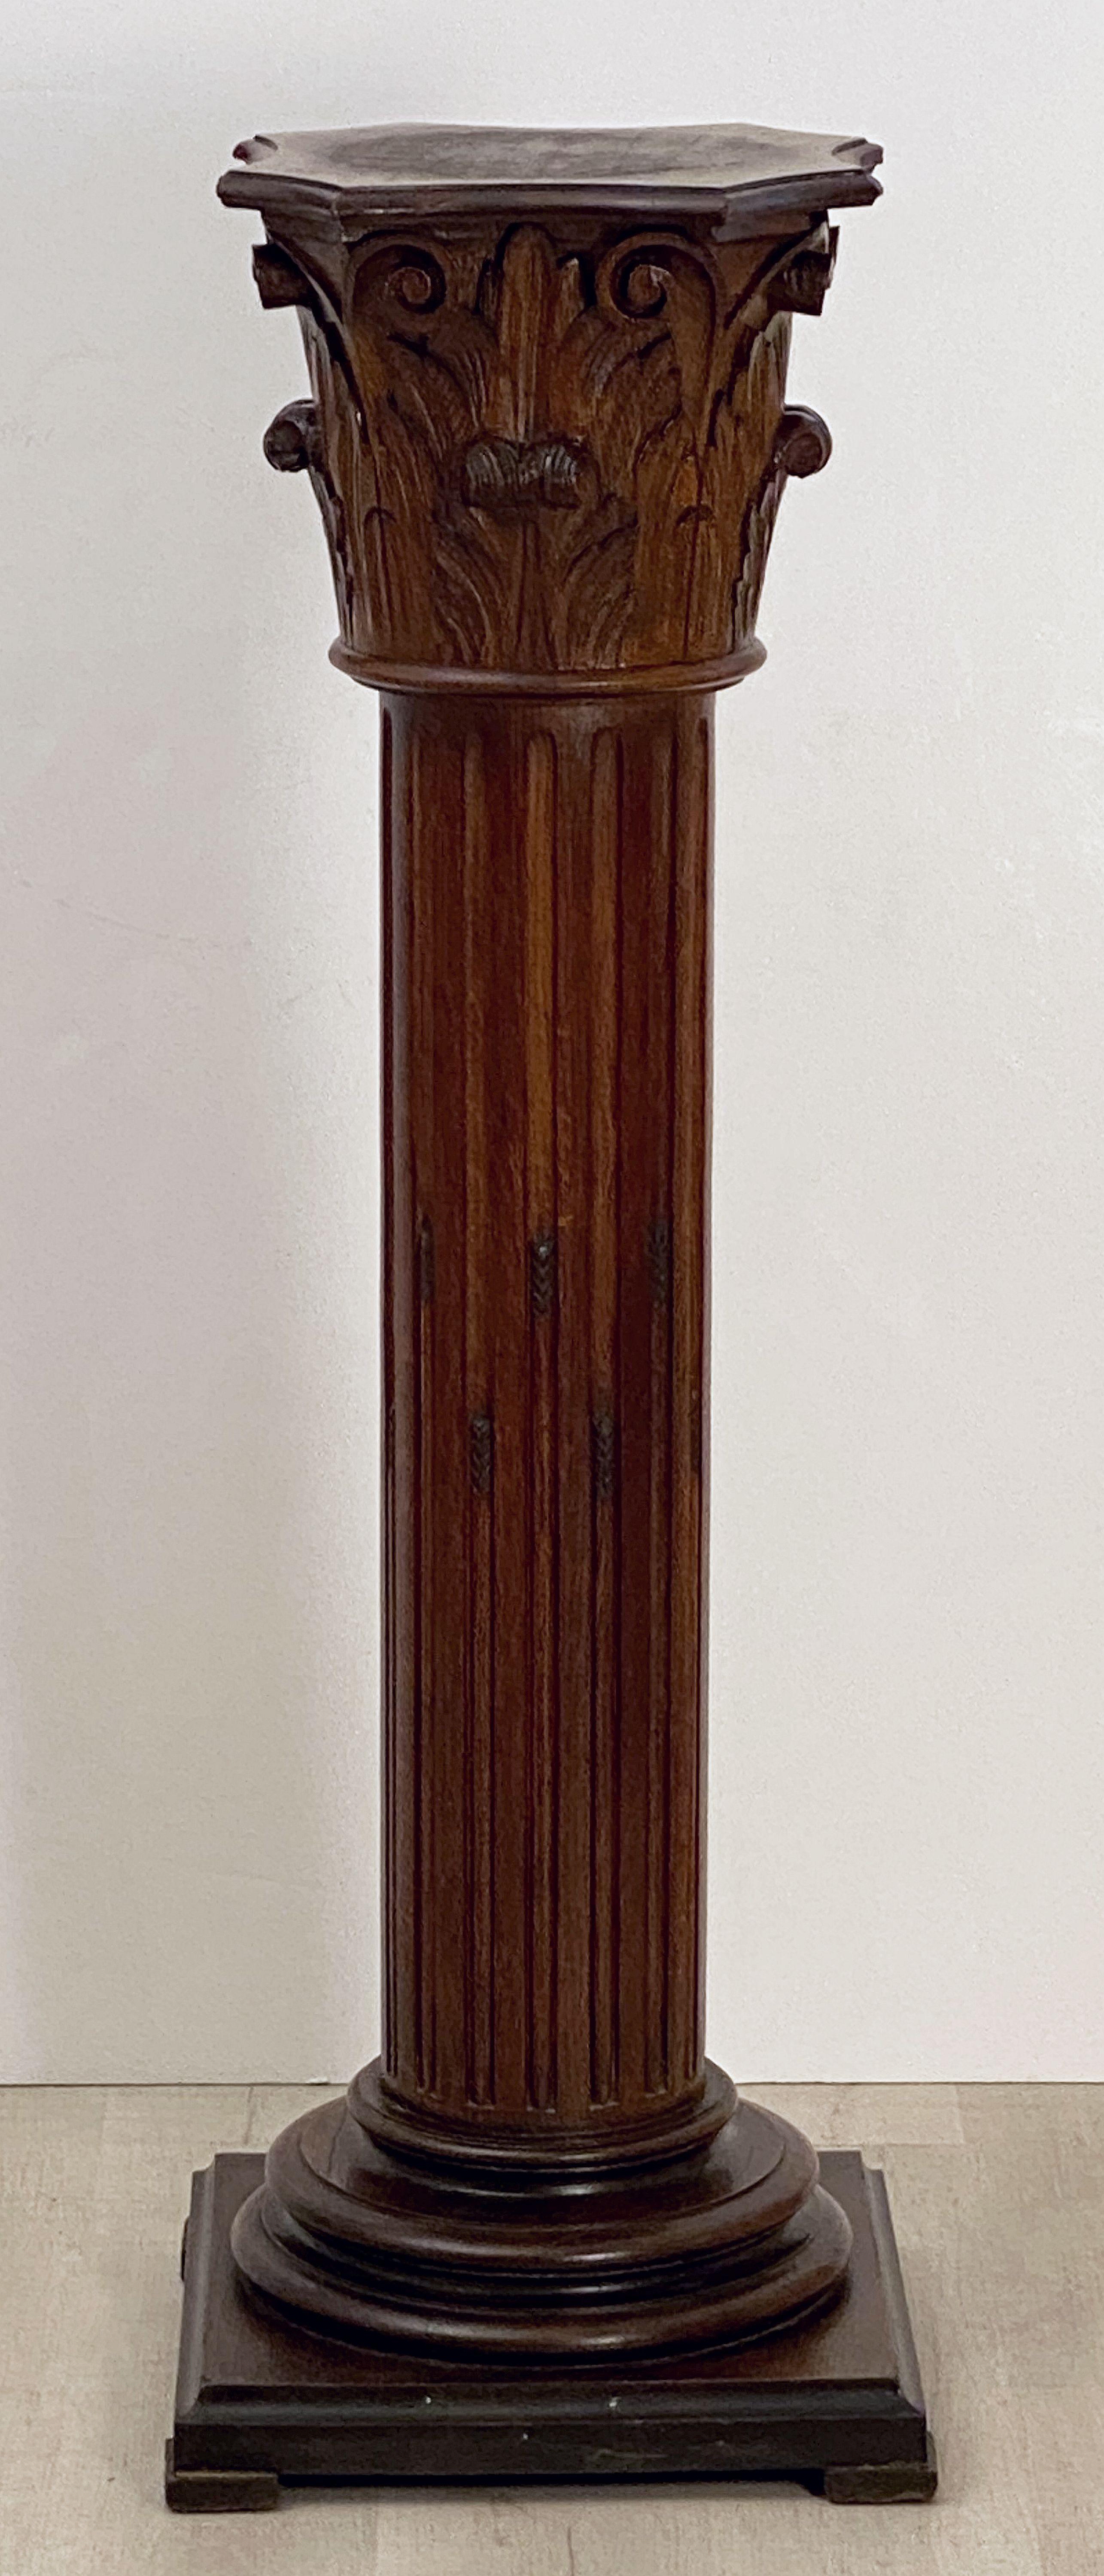 Tall Neoclassical Wooden Column Pedestal Stand or Plinth from France 2